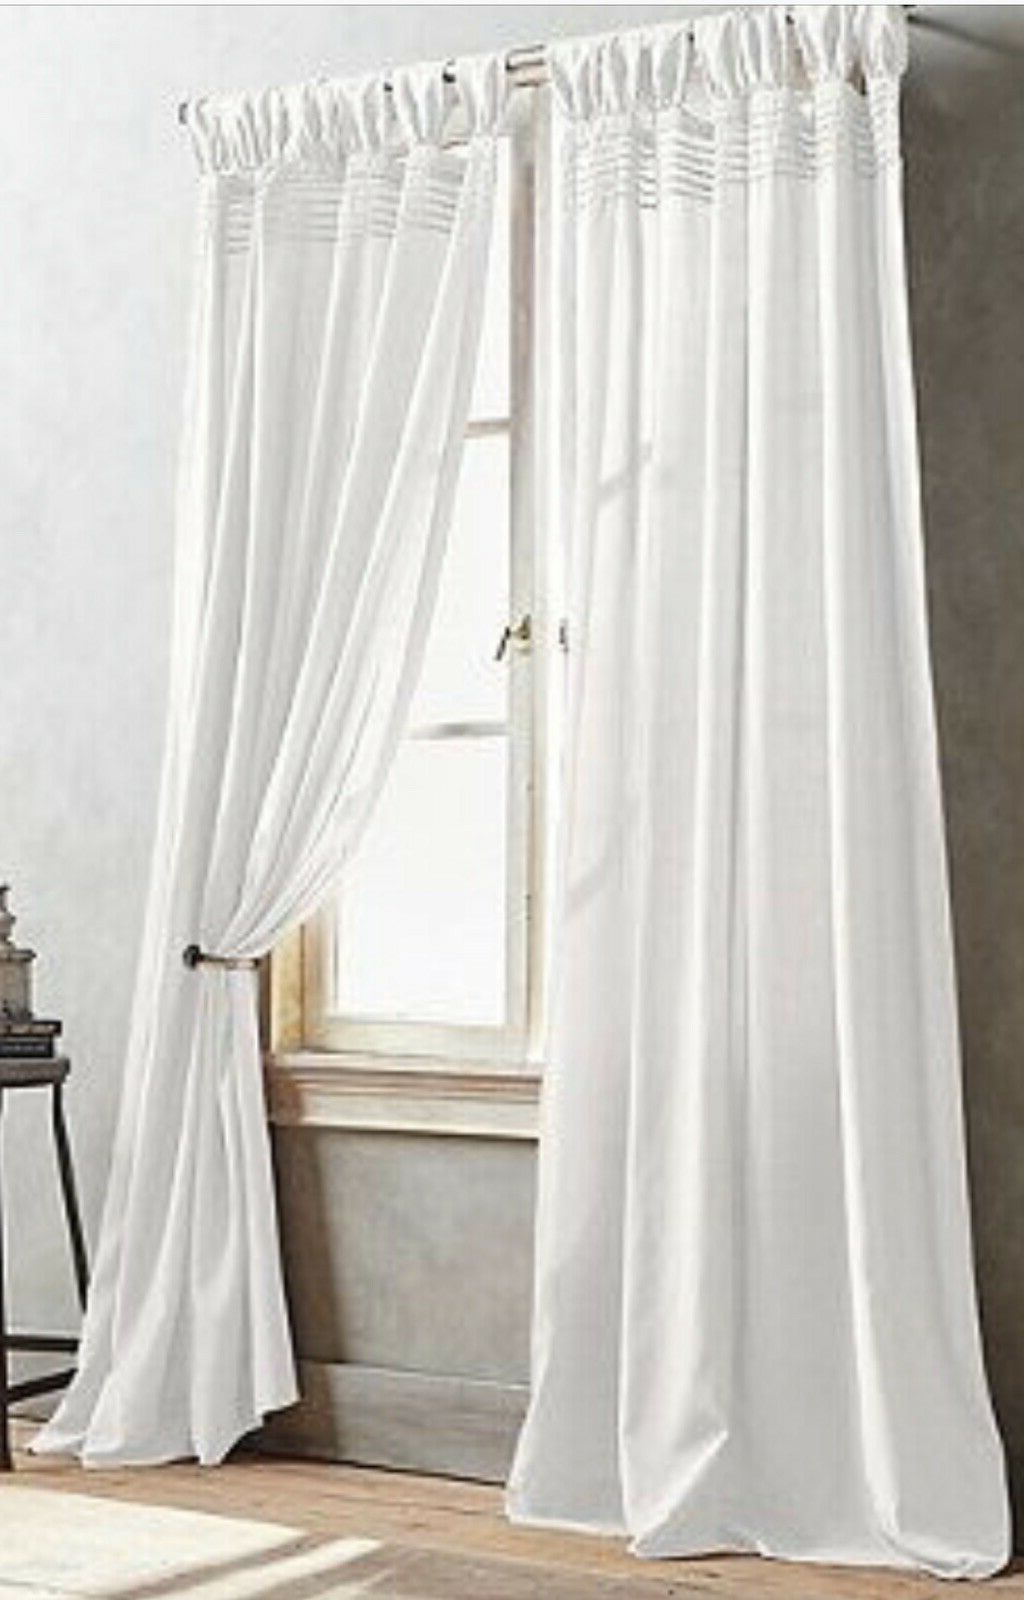 Current Vue Elements Priya Tab Top Window Curtains For 3 New Dkny City Edition Cream Window Curtain Tab Top Pleated Panels 50 X 95” (View 18 of 20)